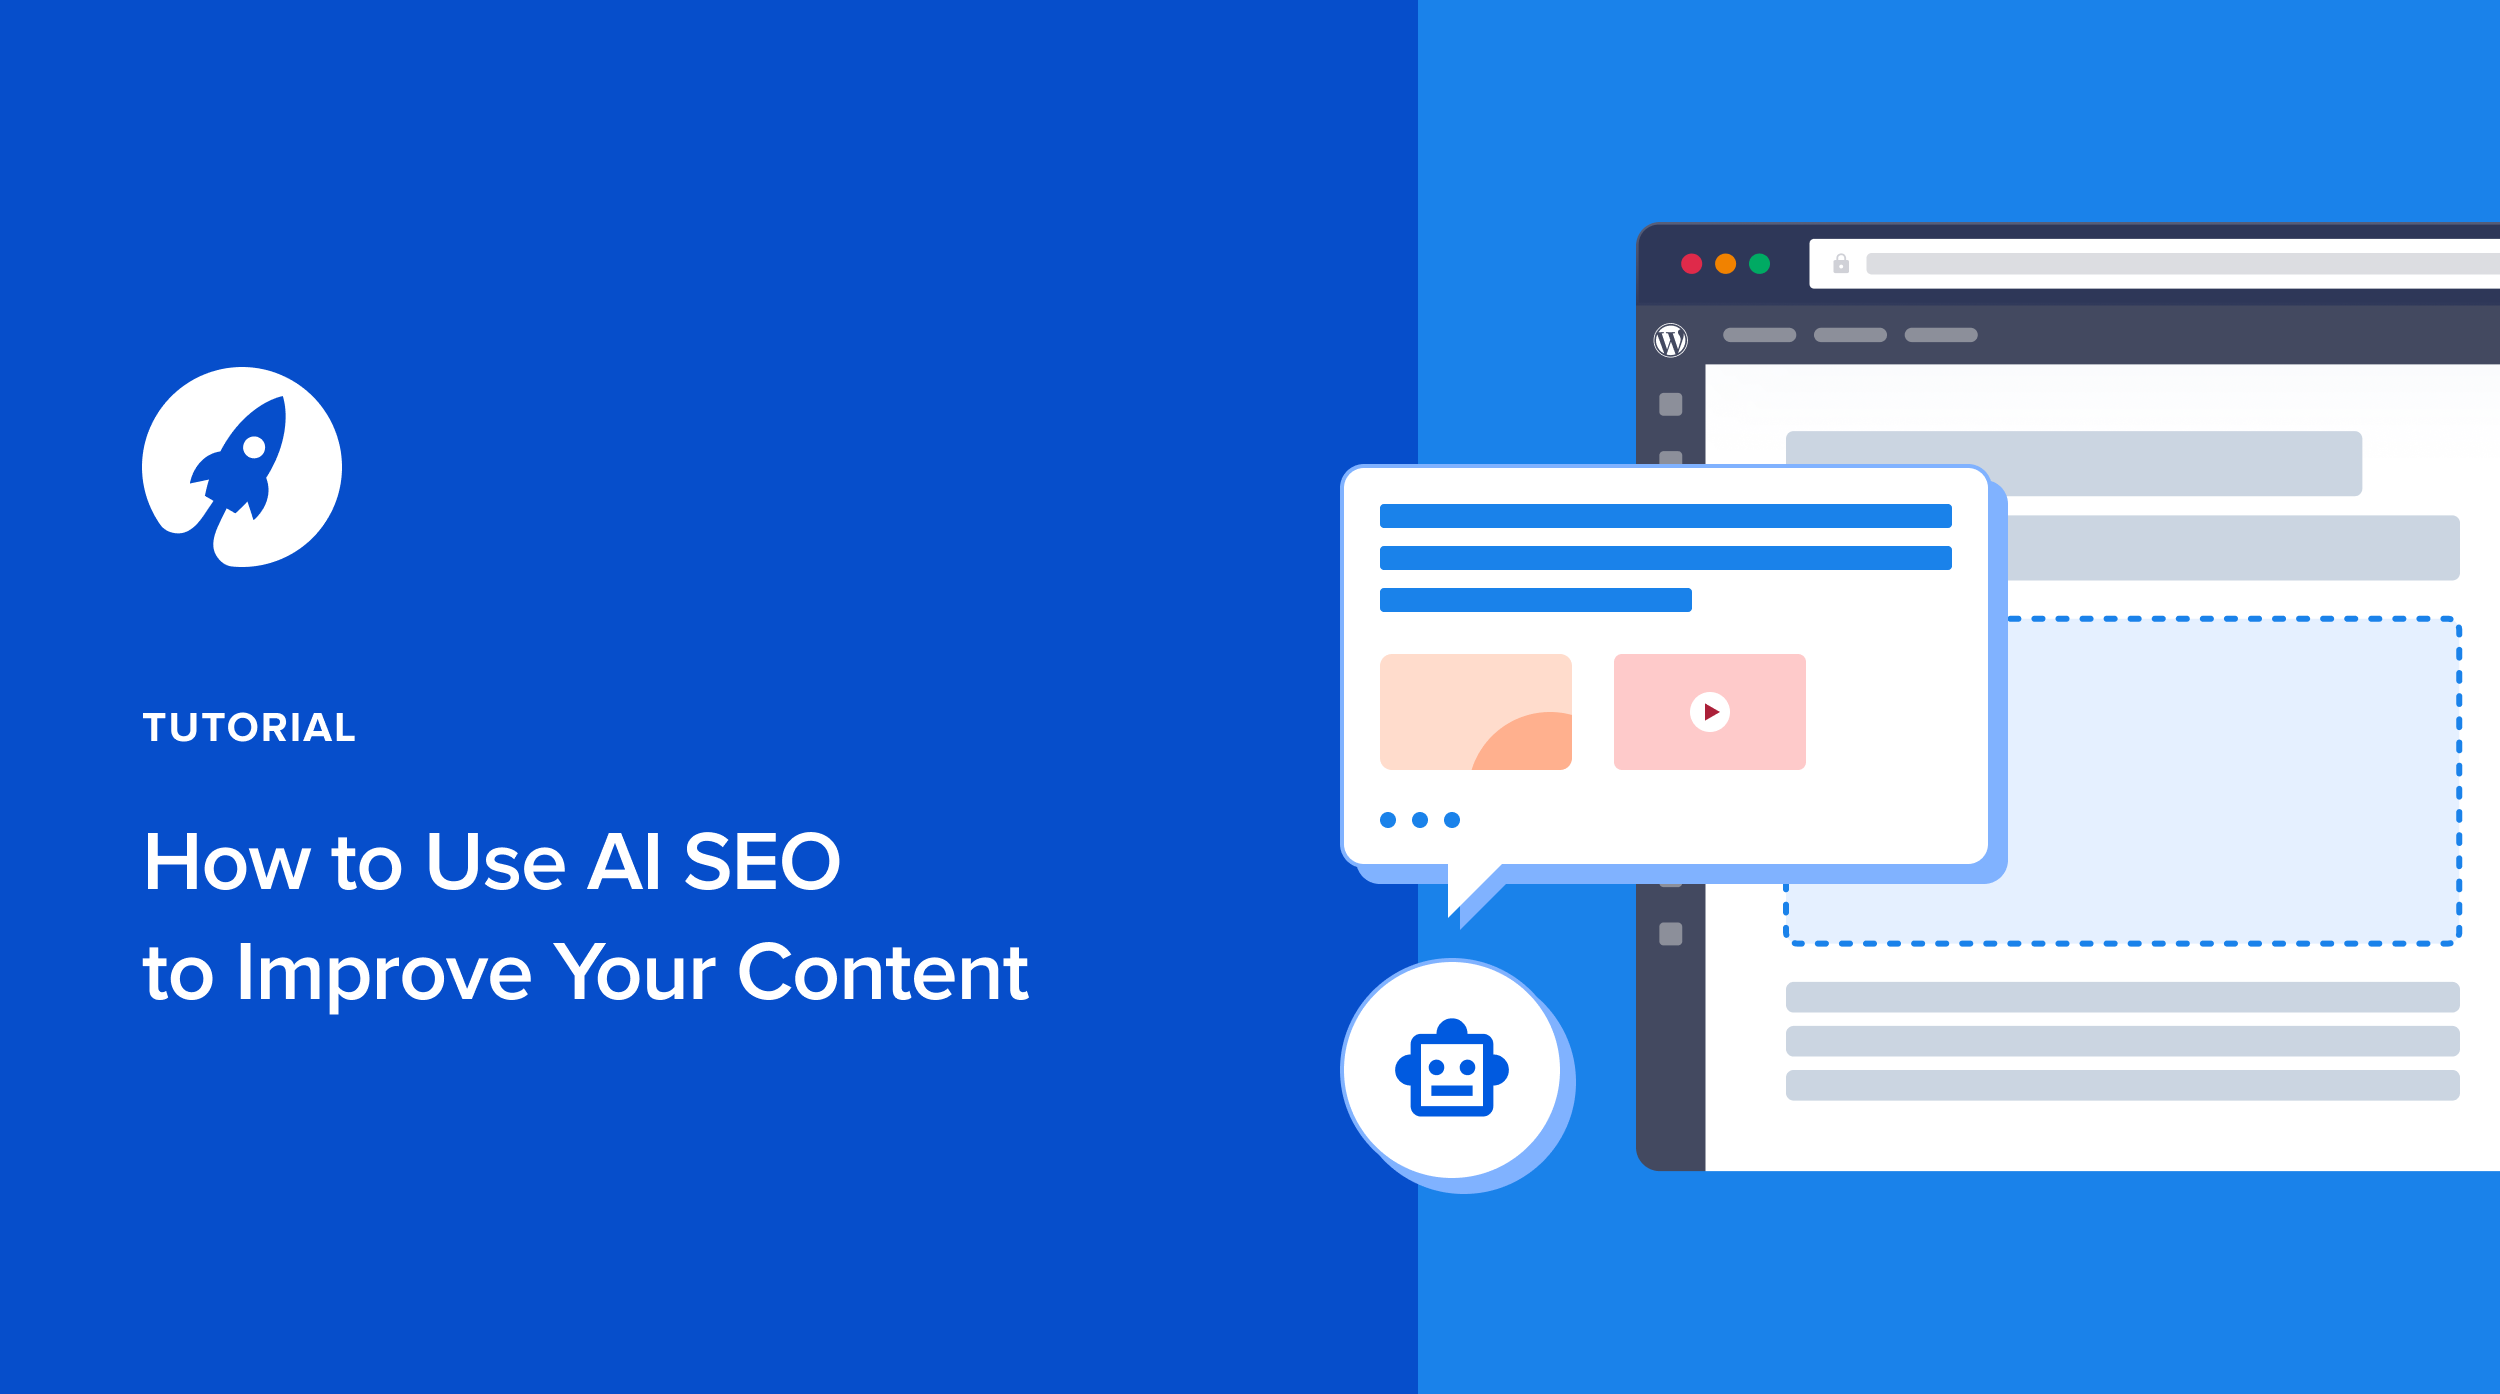 How to Use AI SEO to Improve Your Content